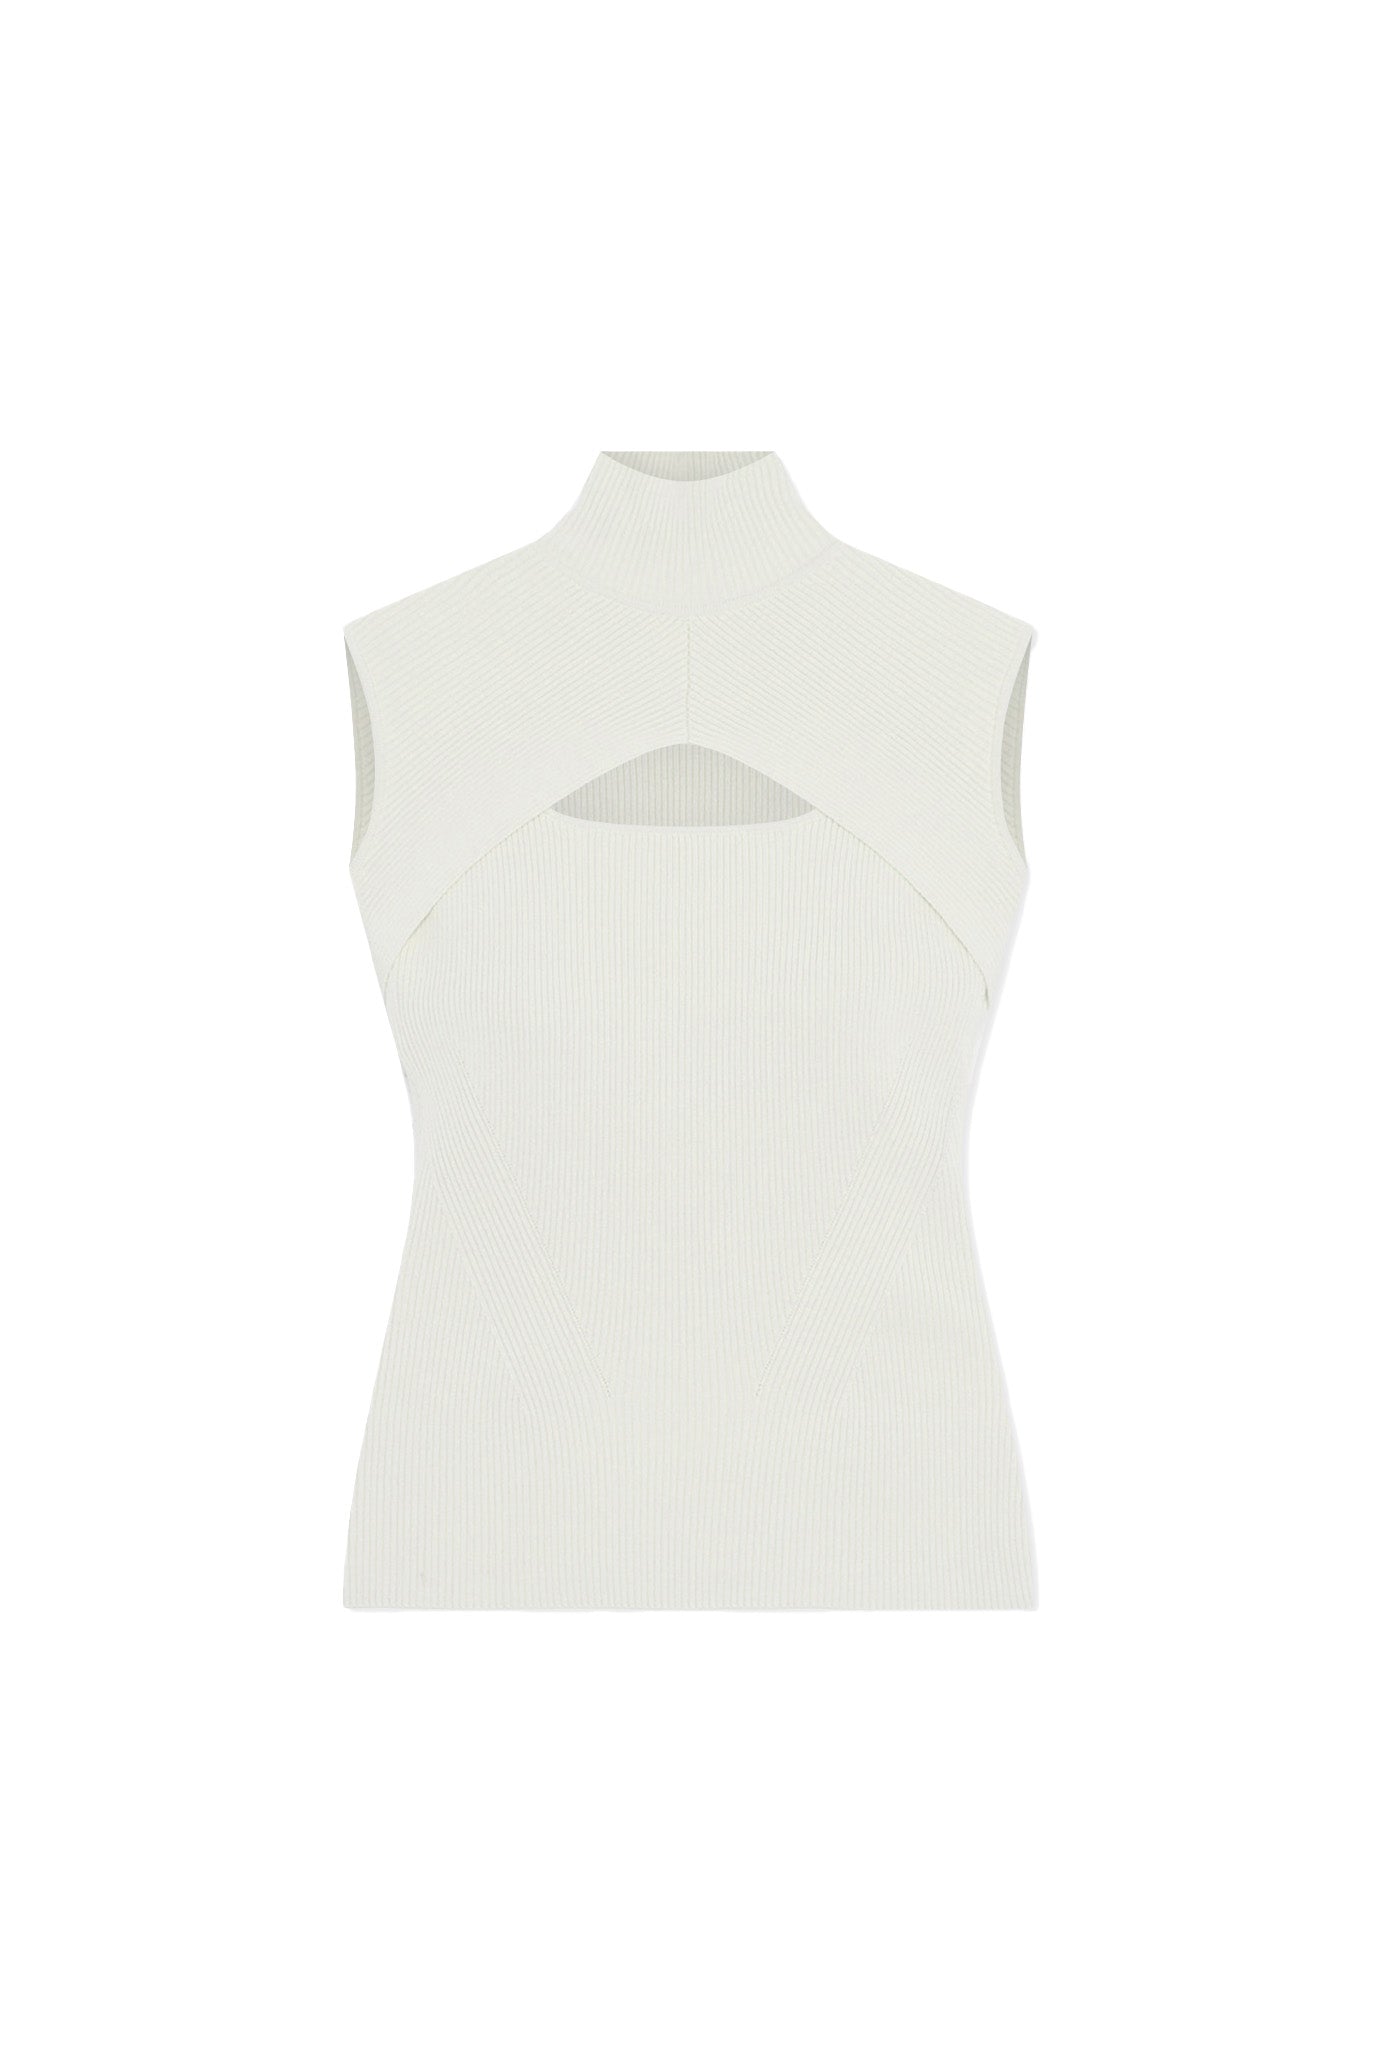 Easton Compact Rib Turtleneck Cut Out Top